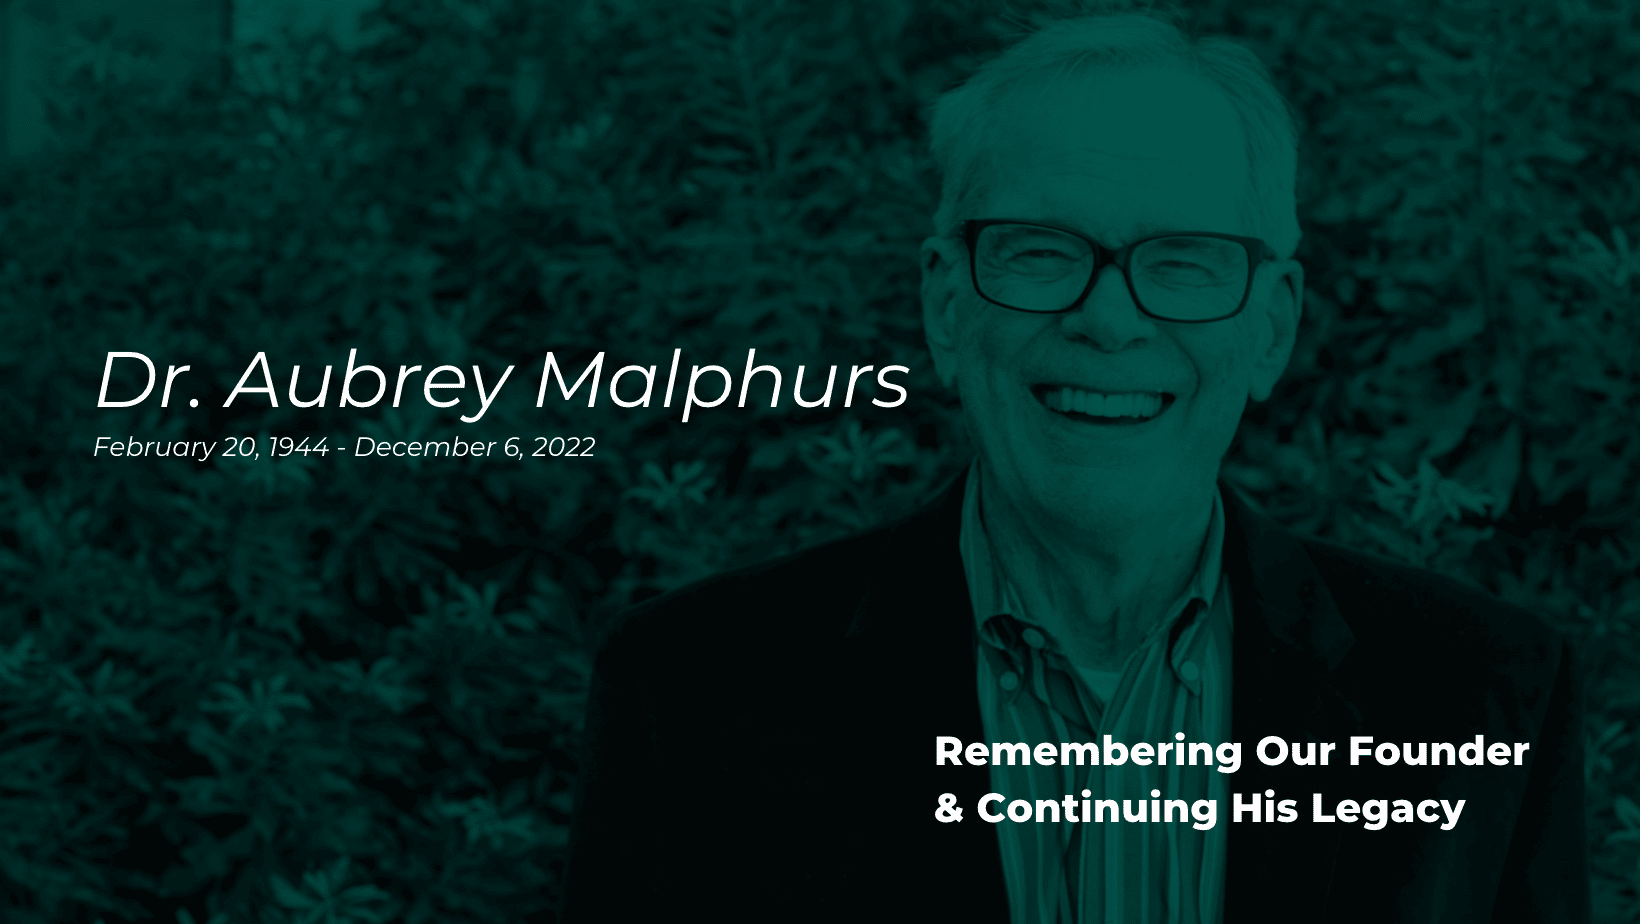 Remembering Dr. Malphurs and Continuing His Legacy